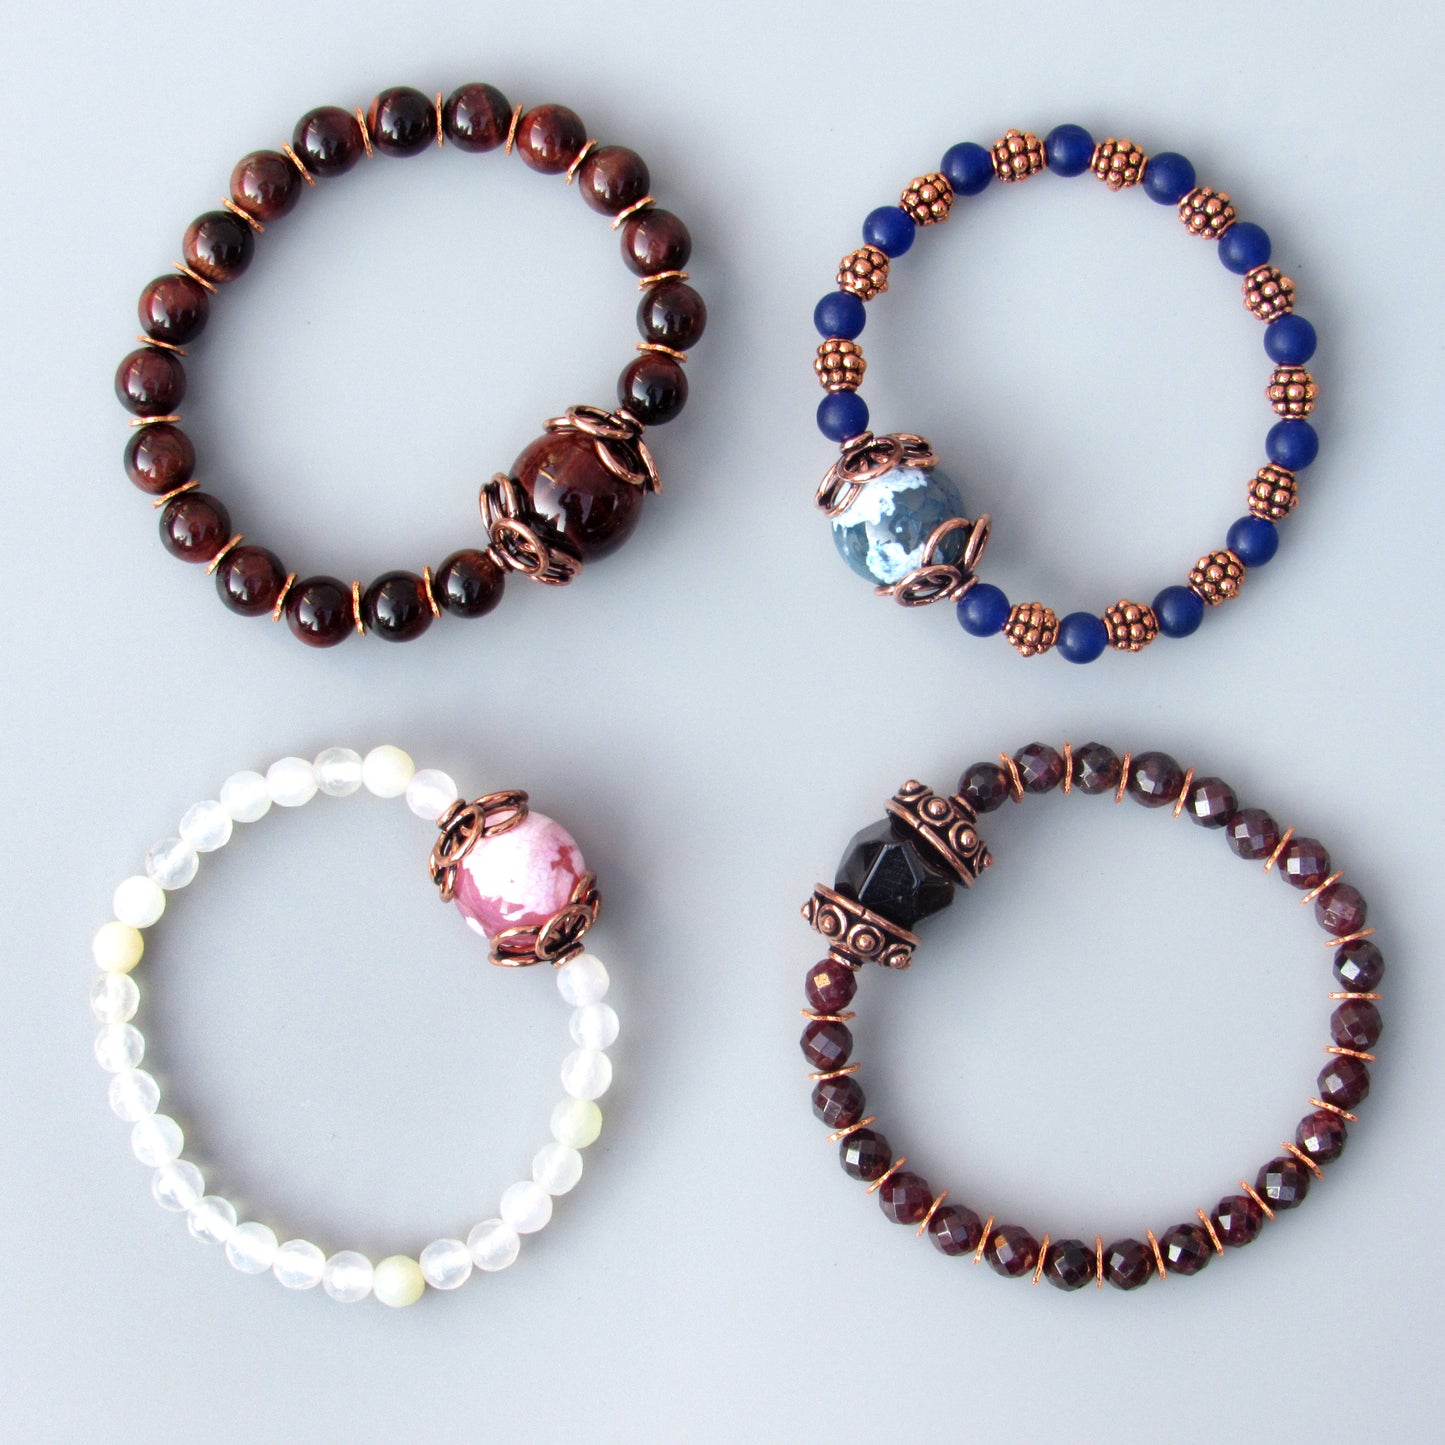 Genuine Copper and Gemstone Bracelet Collection